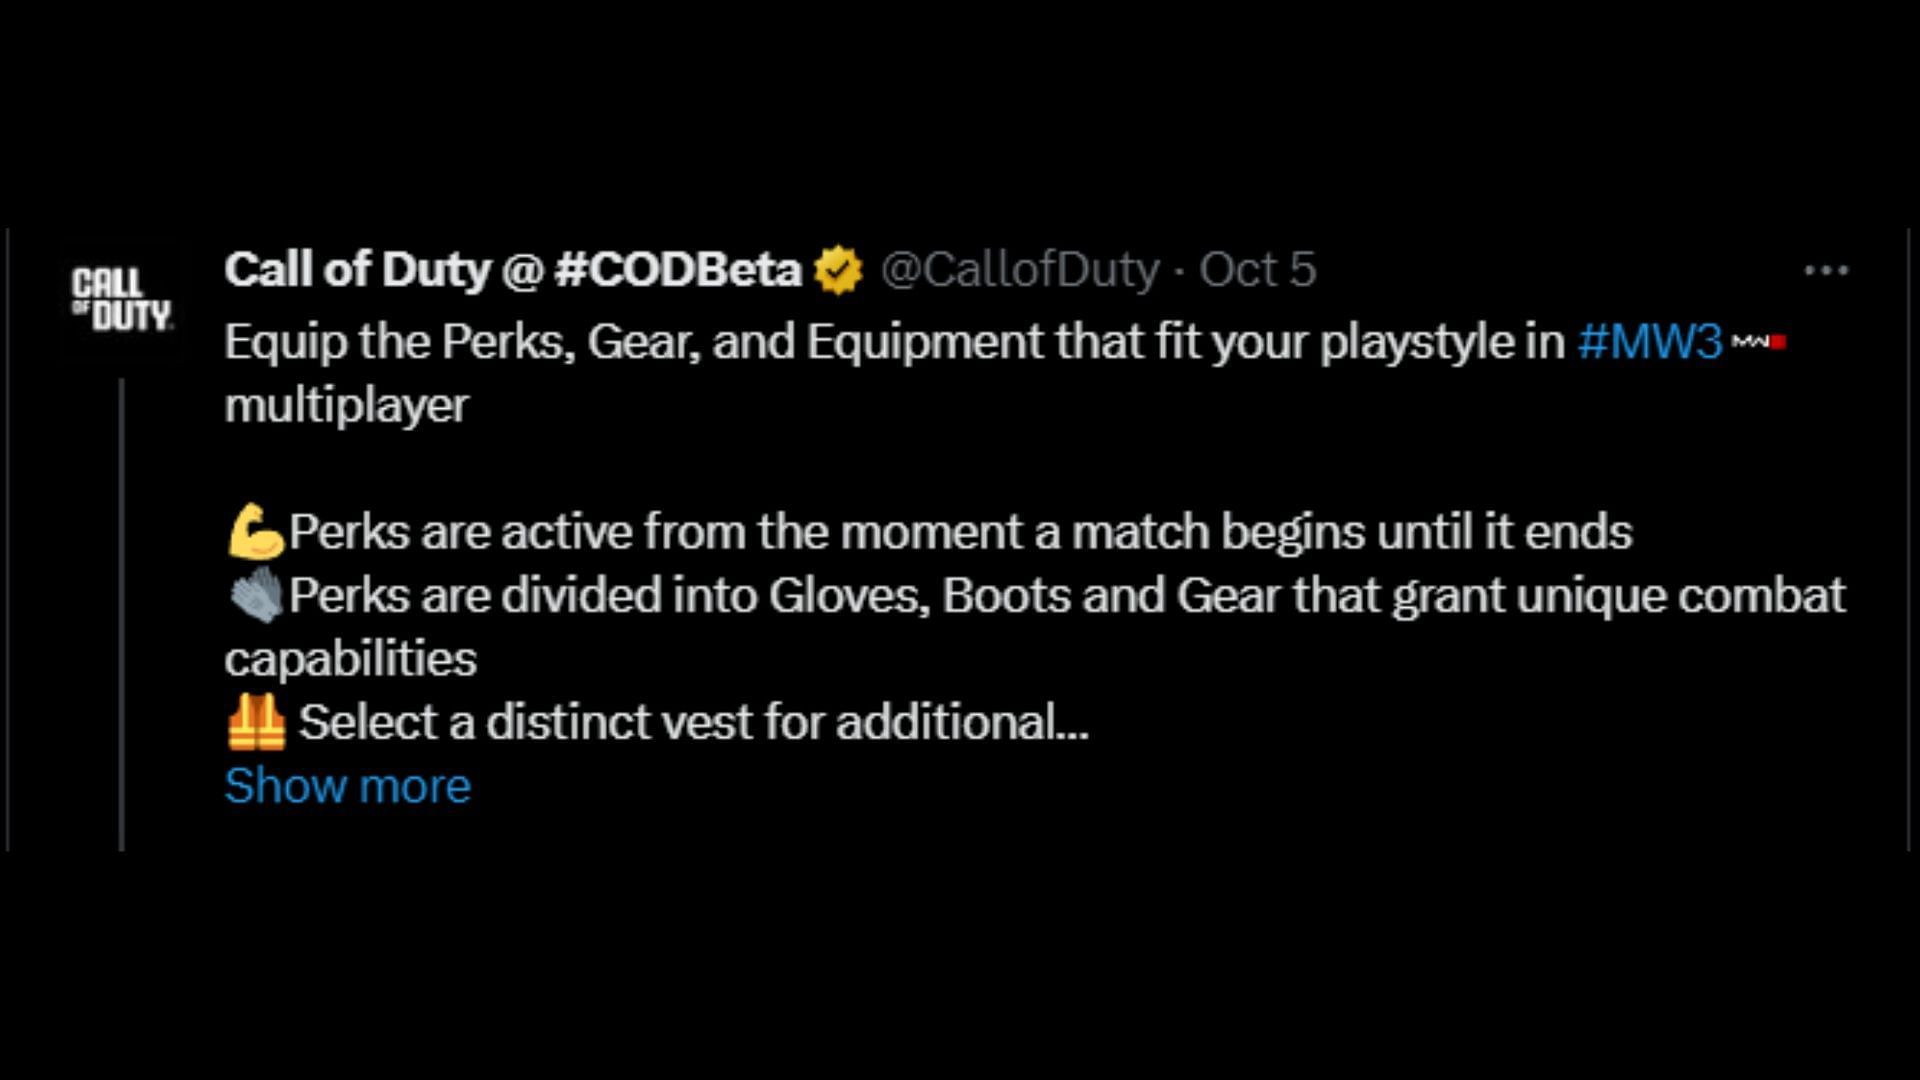 Post from official Call of Duty X account (Image via x.com/CallofDuty)